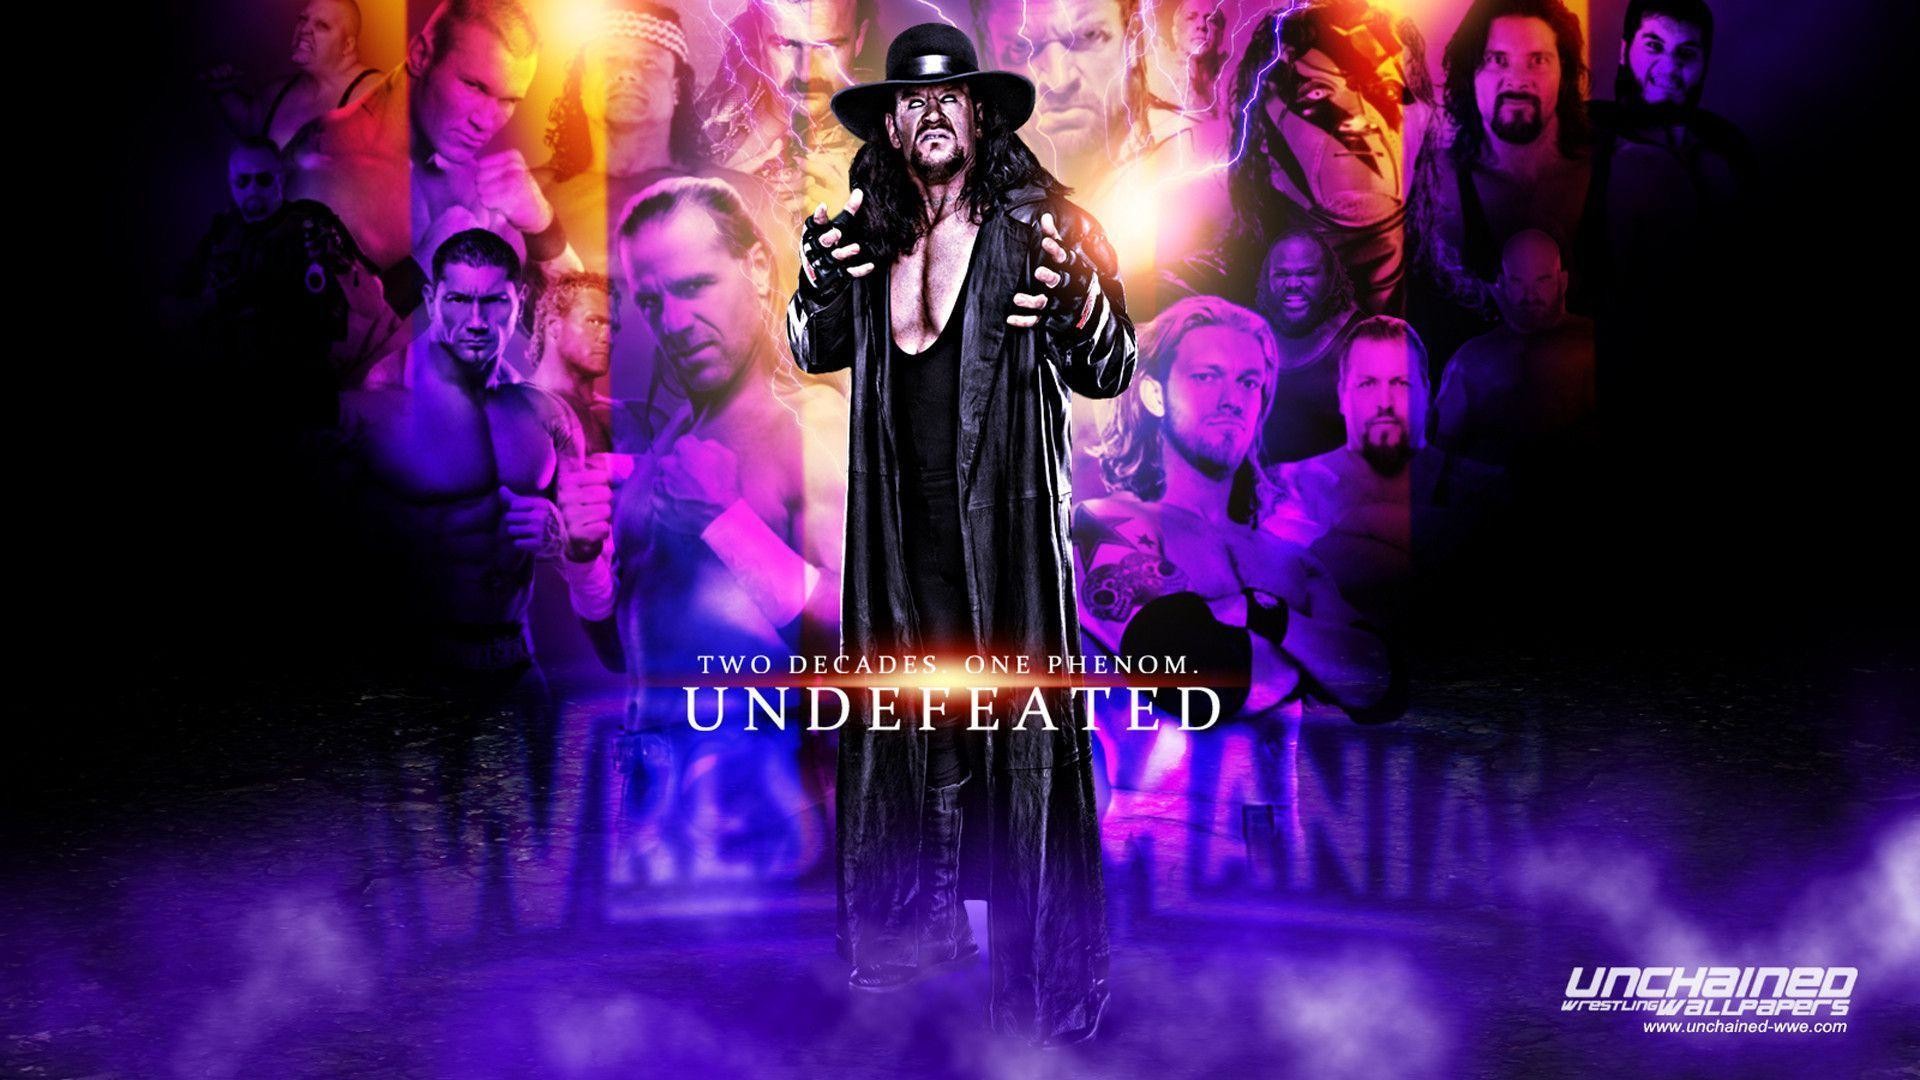 1920x1080 WWE The Undertaker "Undefeated" Wallpaper ~ Unchained-WWE.com .